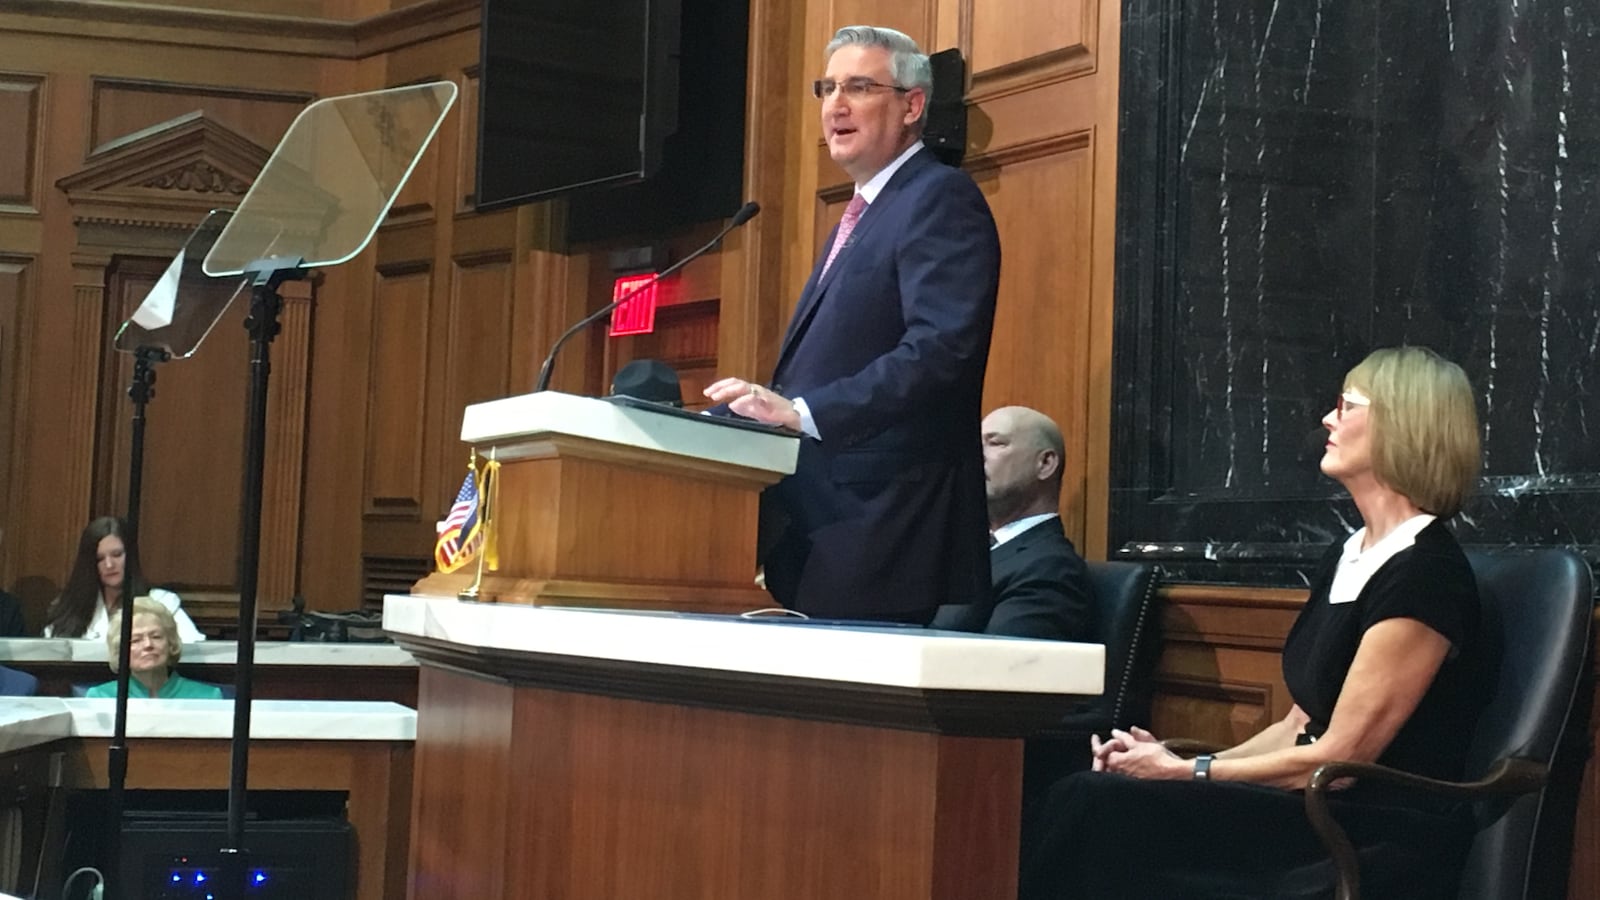 Indiana Gov. Eric Holcomb gives his 2019 State of the State address.